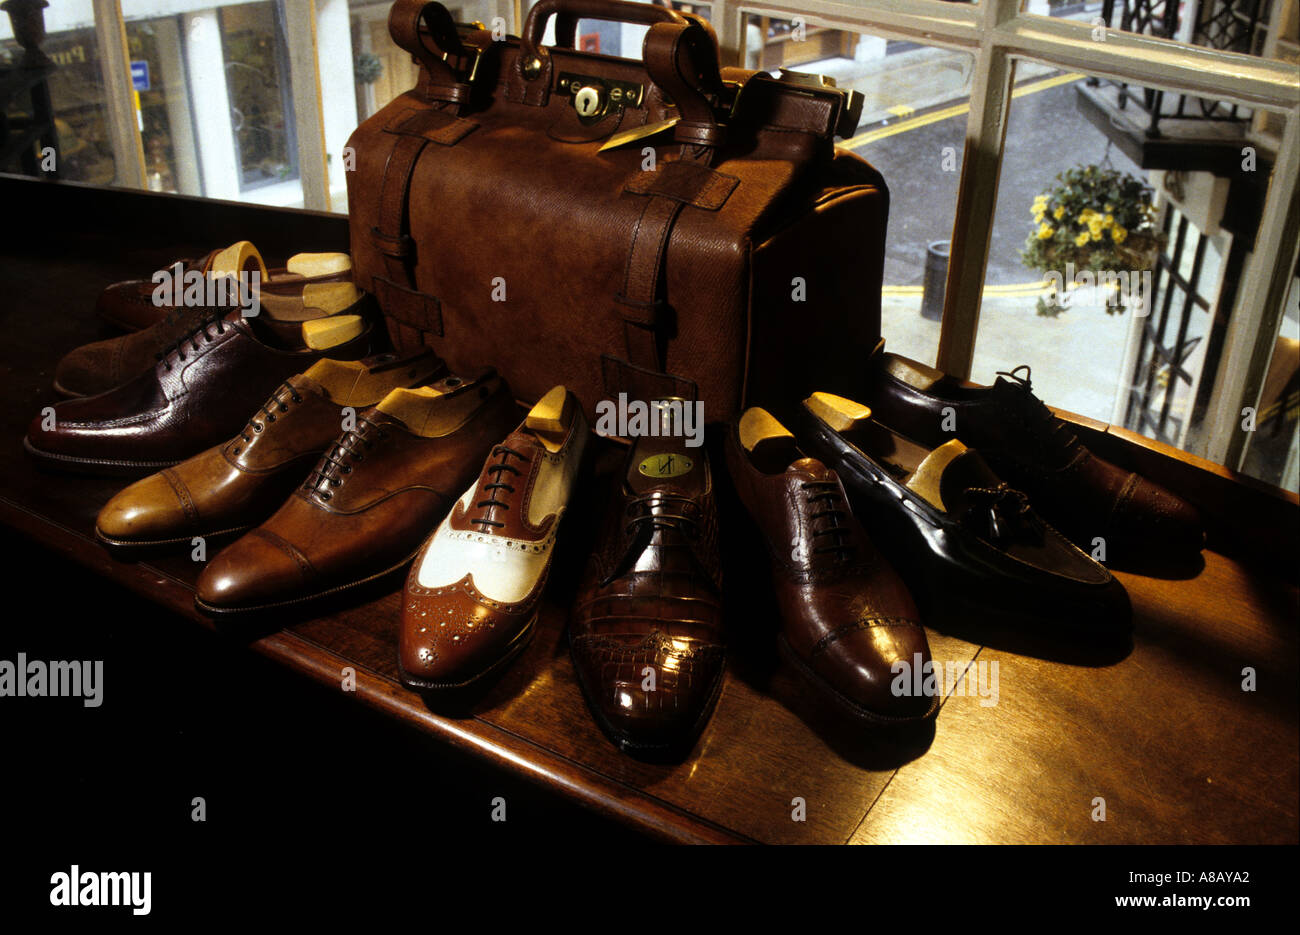 STILL LIFE OF HAND CRAFTED SHOES ETC IN ST JAMES S LONDON ENGLAND Stock Photo